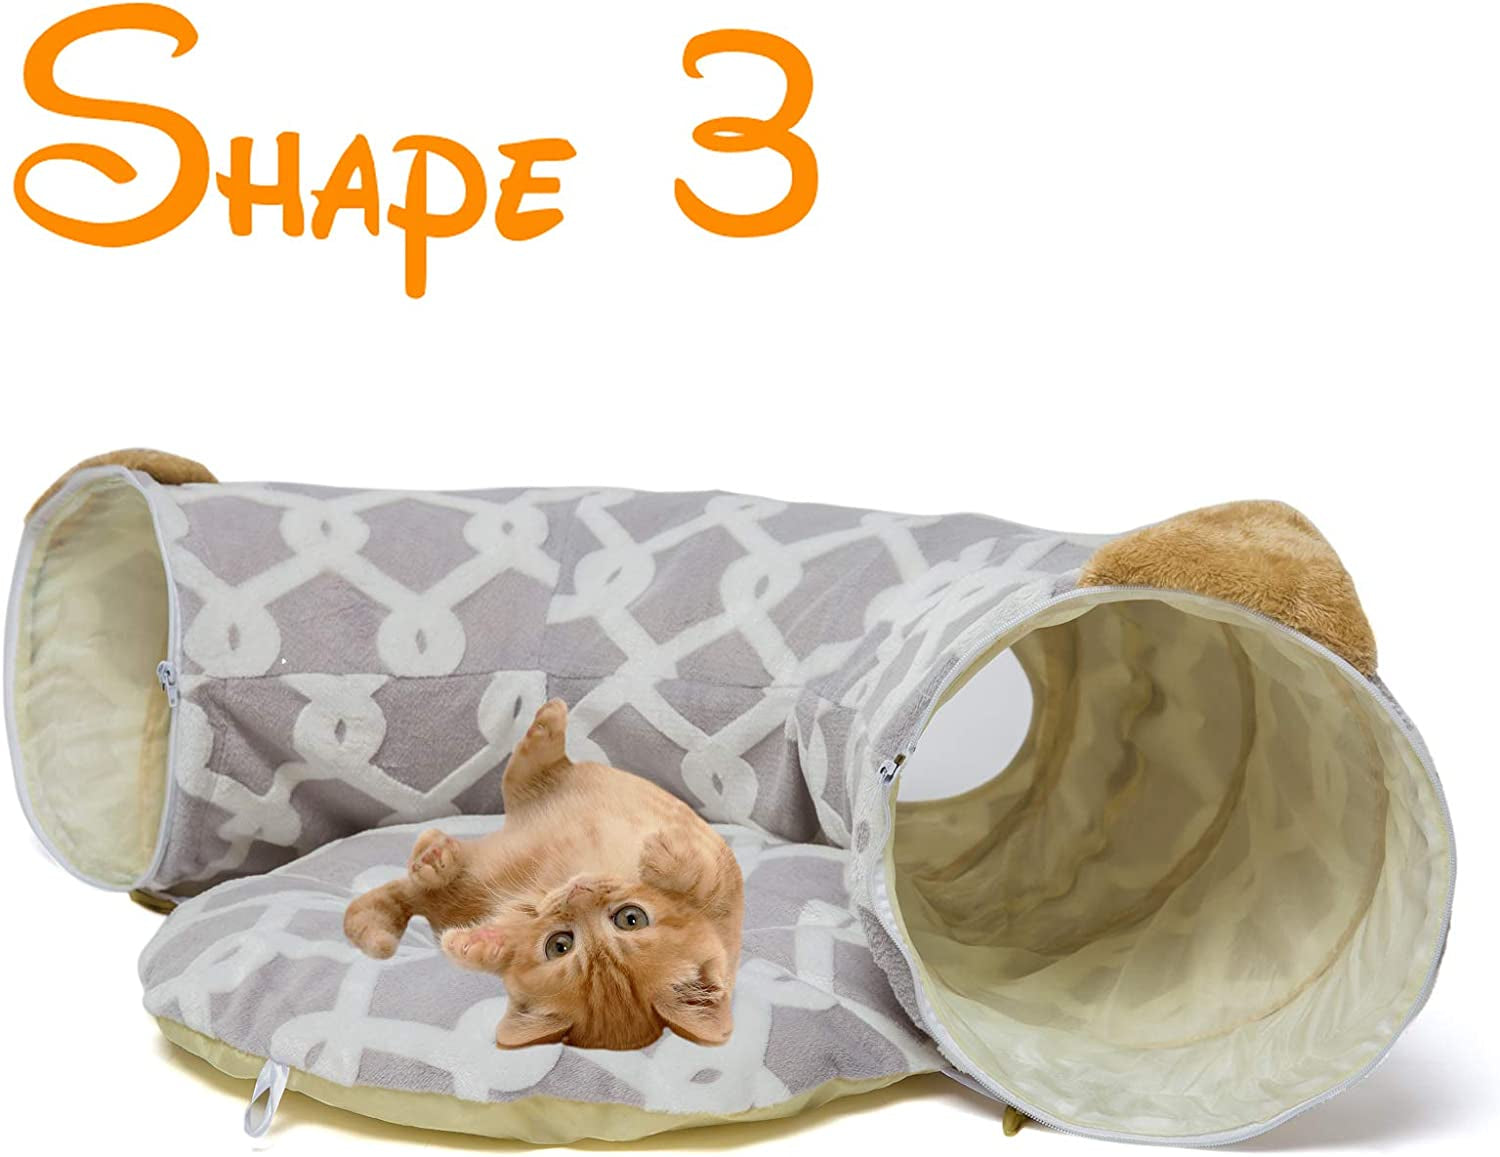 Cat Dog Tunnel Bed with Cushion Tube Toys Oxford Cloth Large Diameter Longer Crinkle Collapsible 3 Way for Large Cats Kittens Kitty Small Puppy Outdoor 3FT